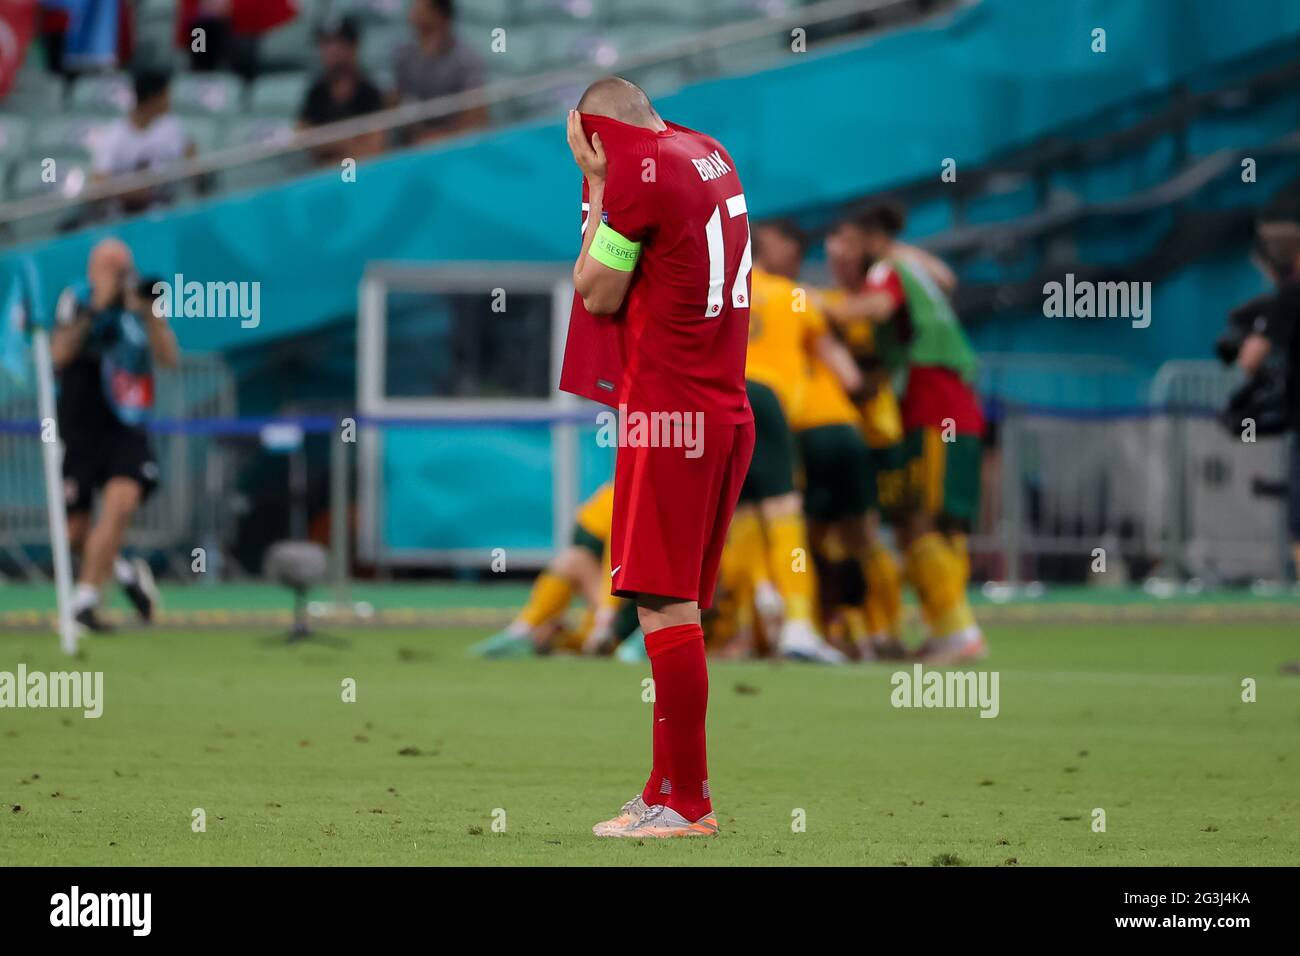 Turkey’s Burak Yilmaz during the UEFA Euro 2020 Group A match at the Baku Olympic Stadium in Azerbaijan. Picture date: Wednesday June 16, 2021. Stock Photo